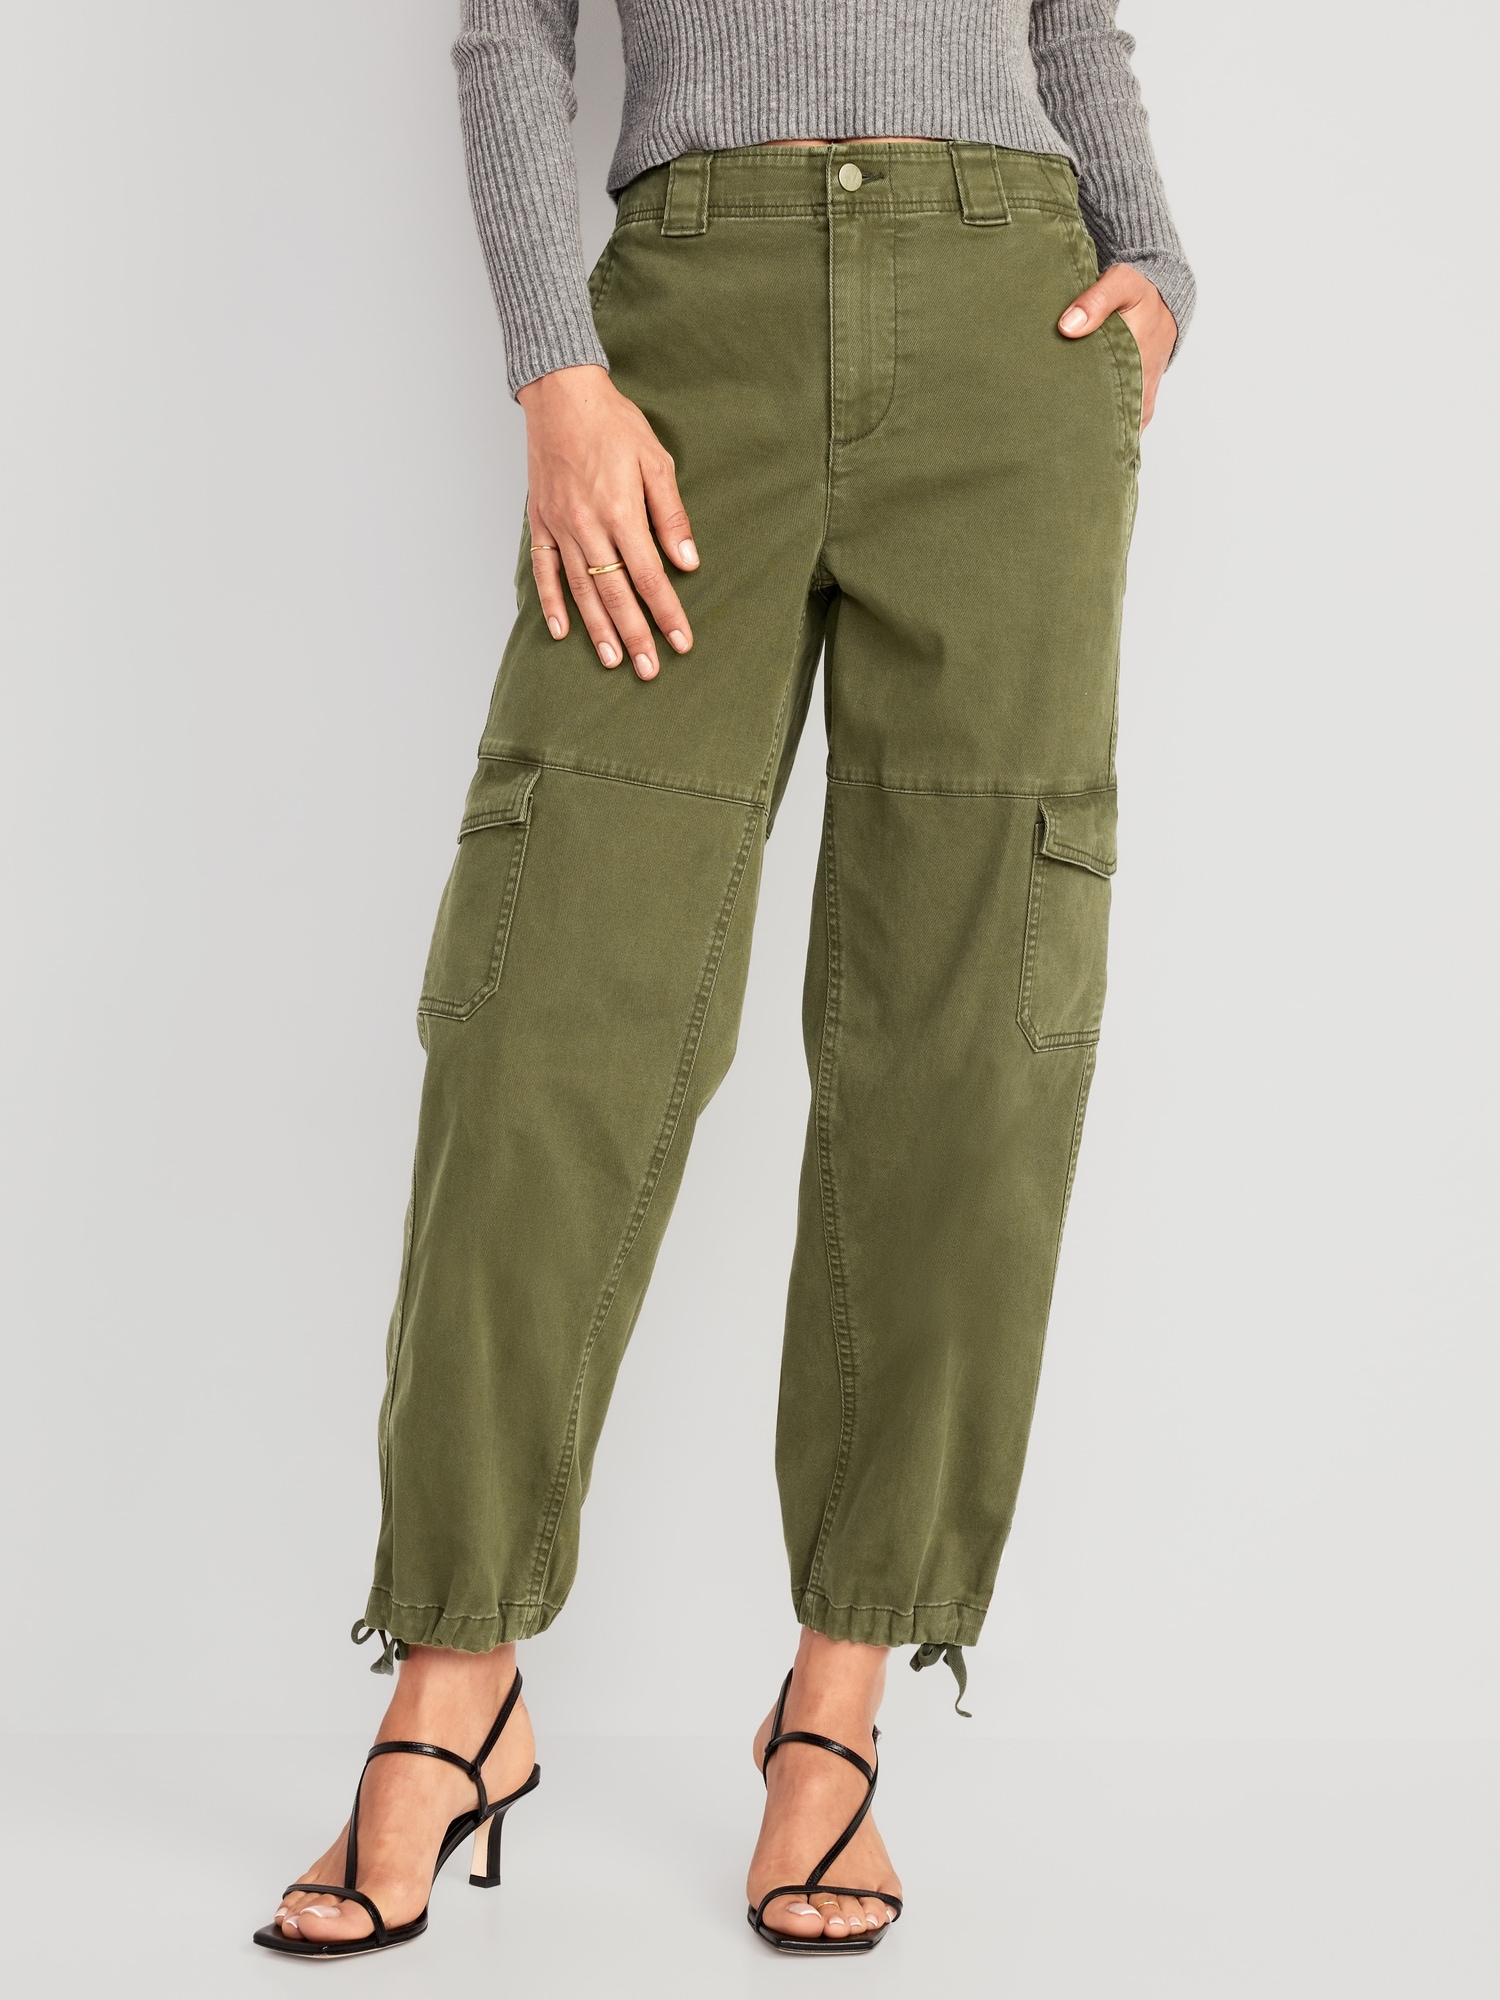 Womens Cargo Pants With 6 Convenient Pockets Trousers Casual Pants